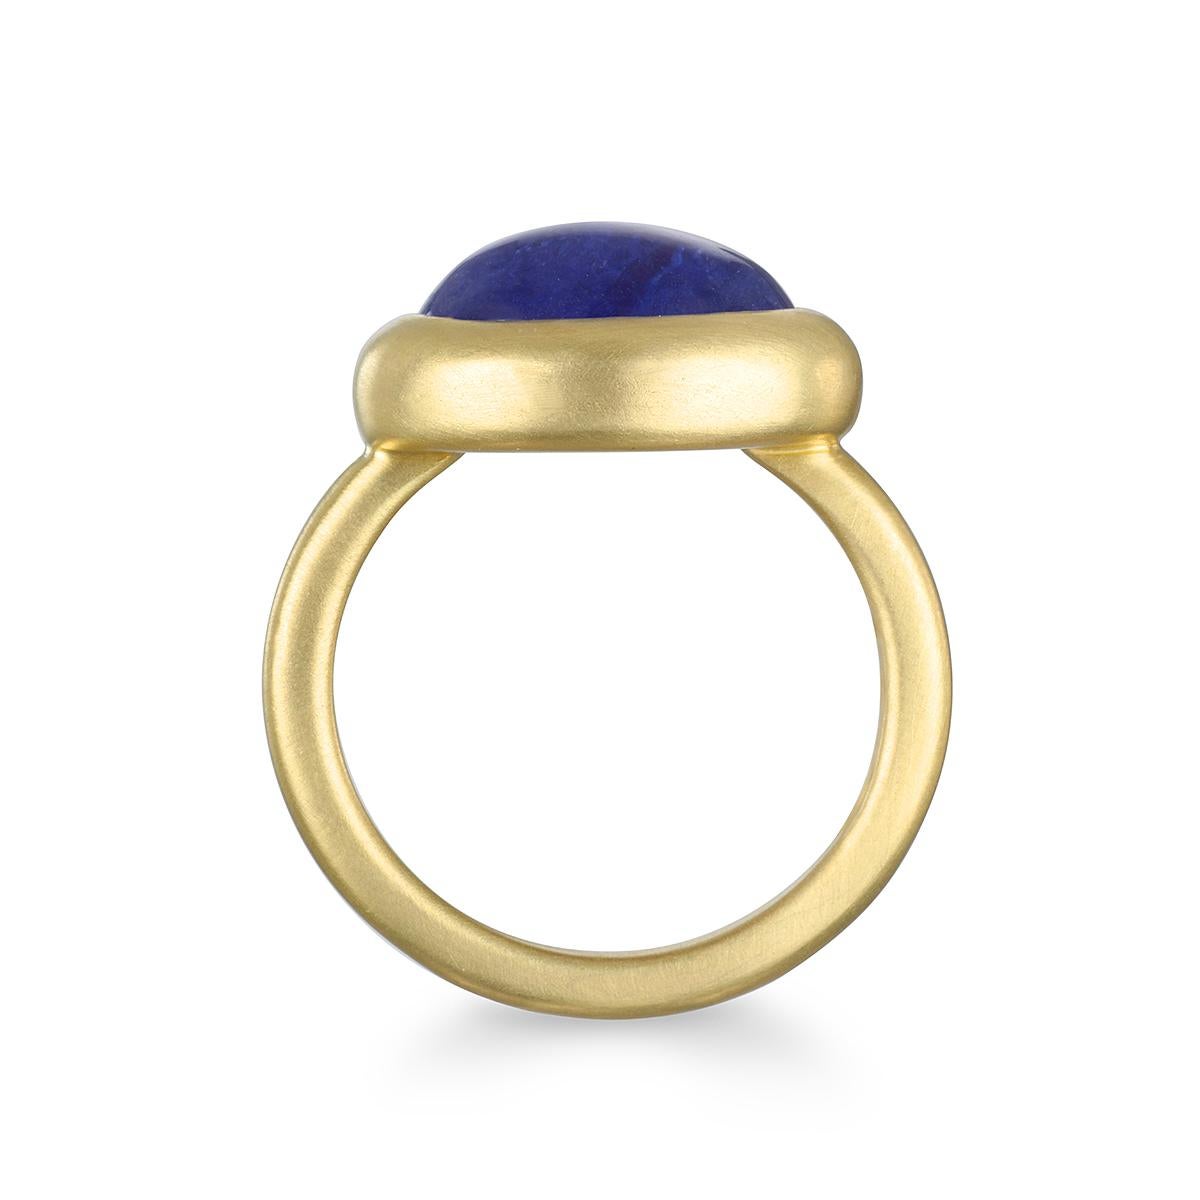 Faye Kim's 18 Karat Gold Tanzanite Cabachon Ring, with its intriguing blue-violet hue, is beautifully bezel set and matte finished. The ring can be worn alone or stacked, and is sure to be a conversation starter.

Tanzanite Cabachon 8.21 Carats
Size